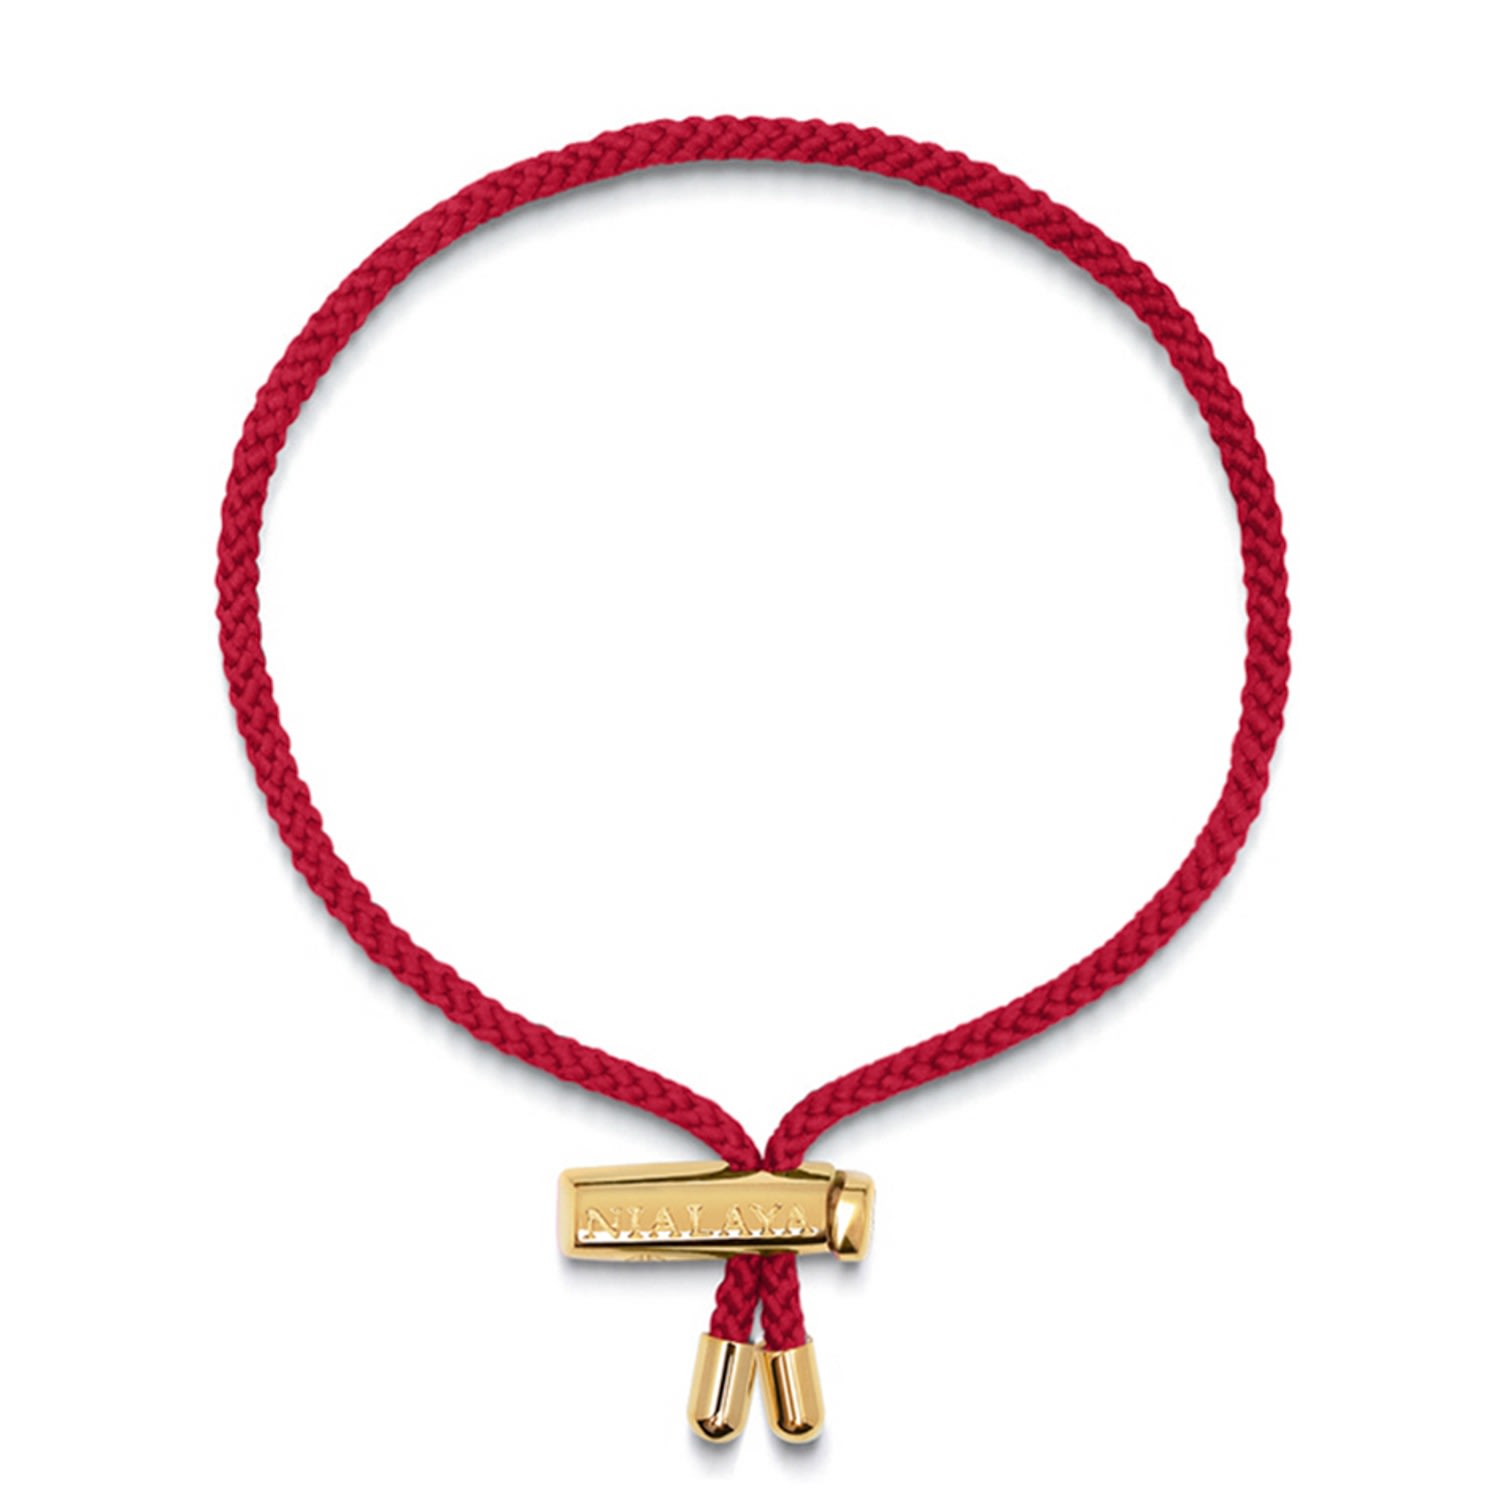 Nialaya Gold / Red Men's Red String Bracelet With Adjustable Lock In Gold/red